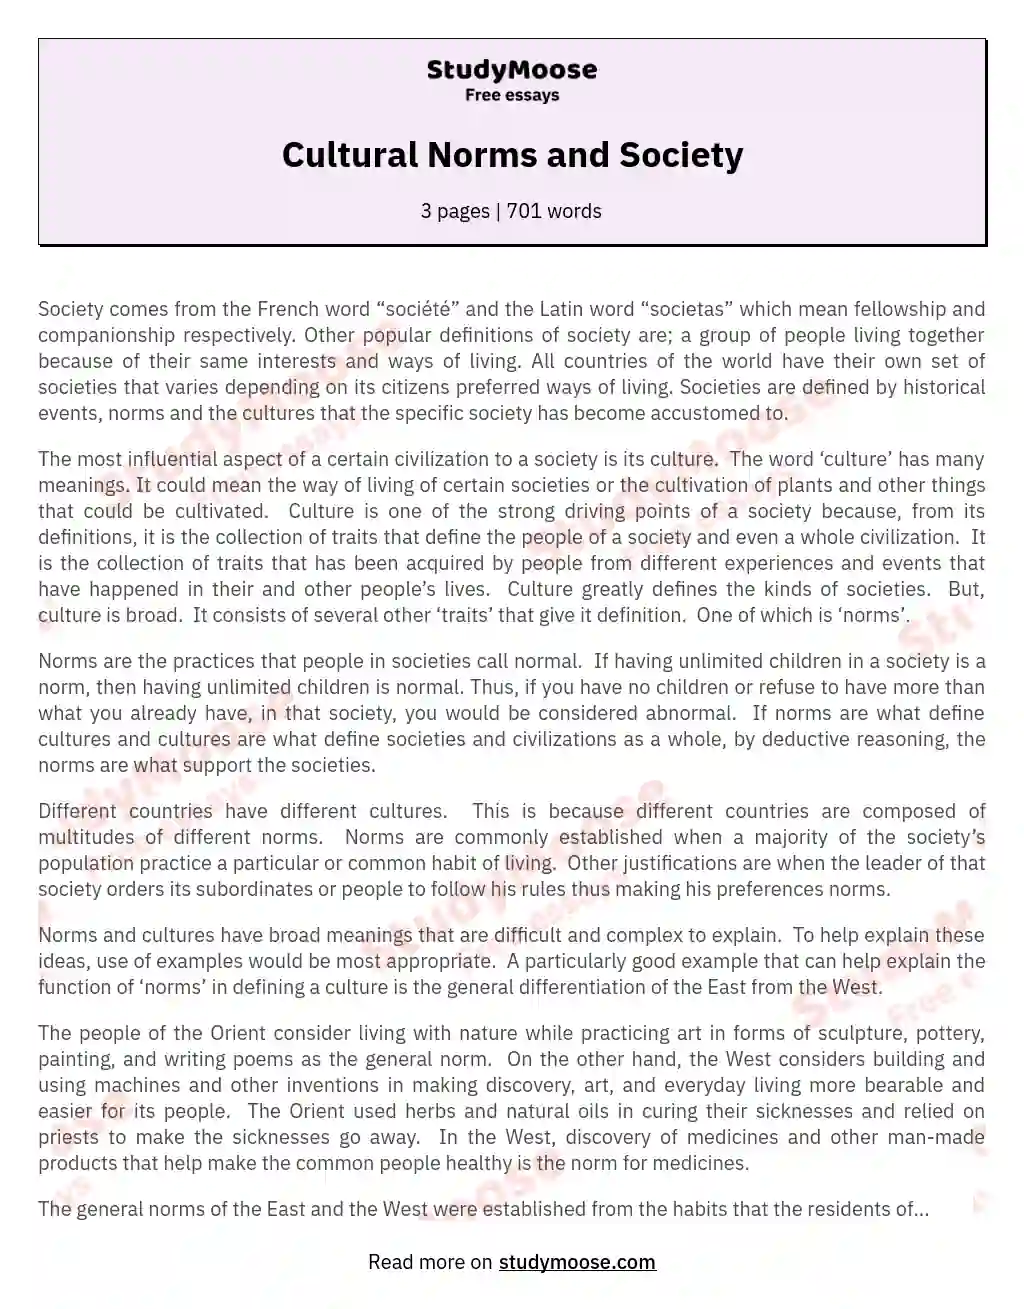 Cultural Norms and Society essay